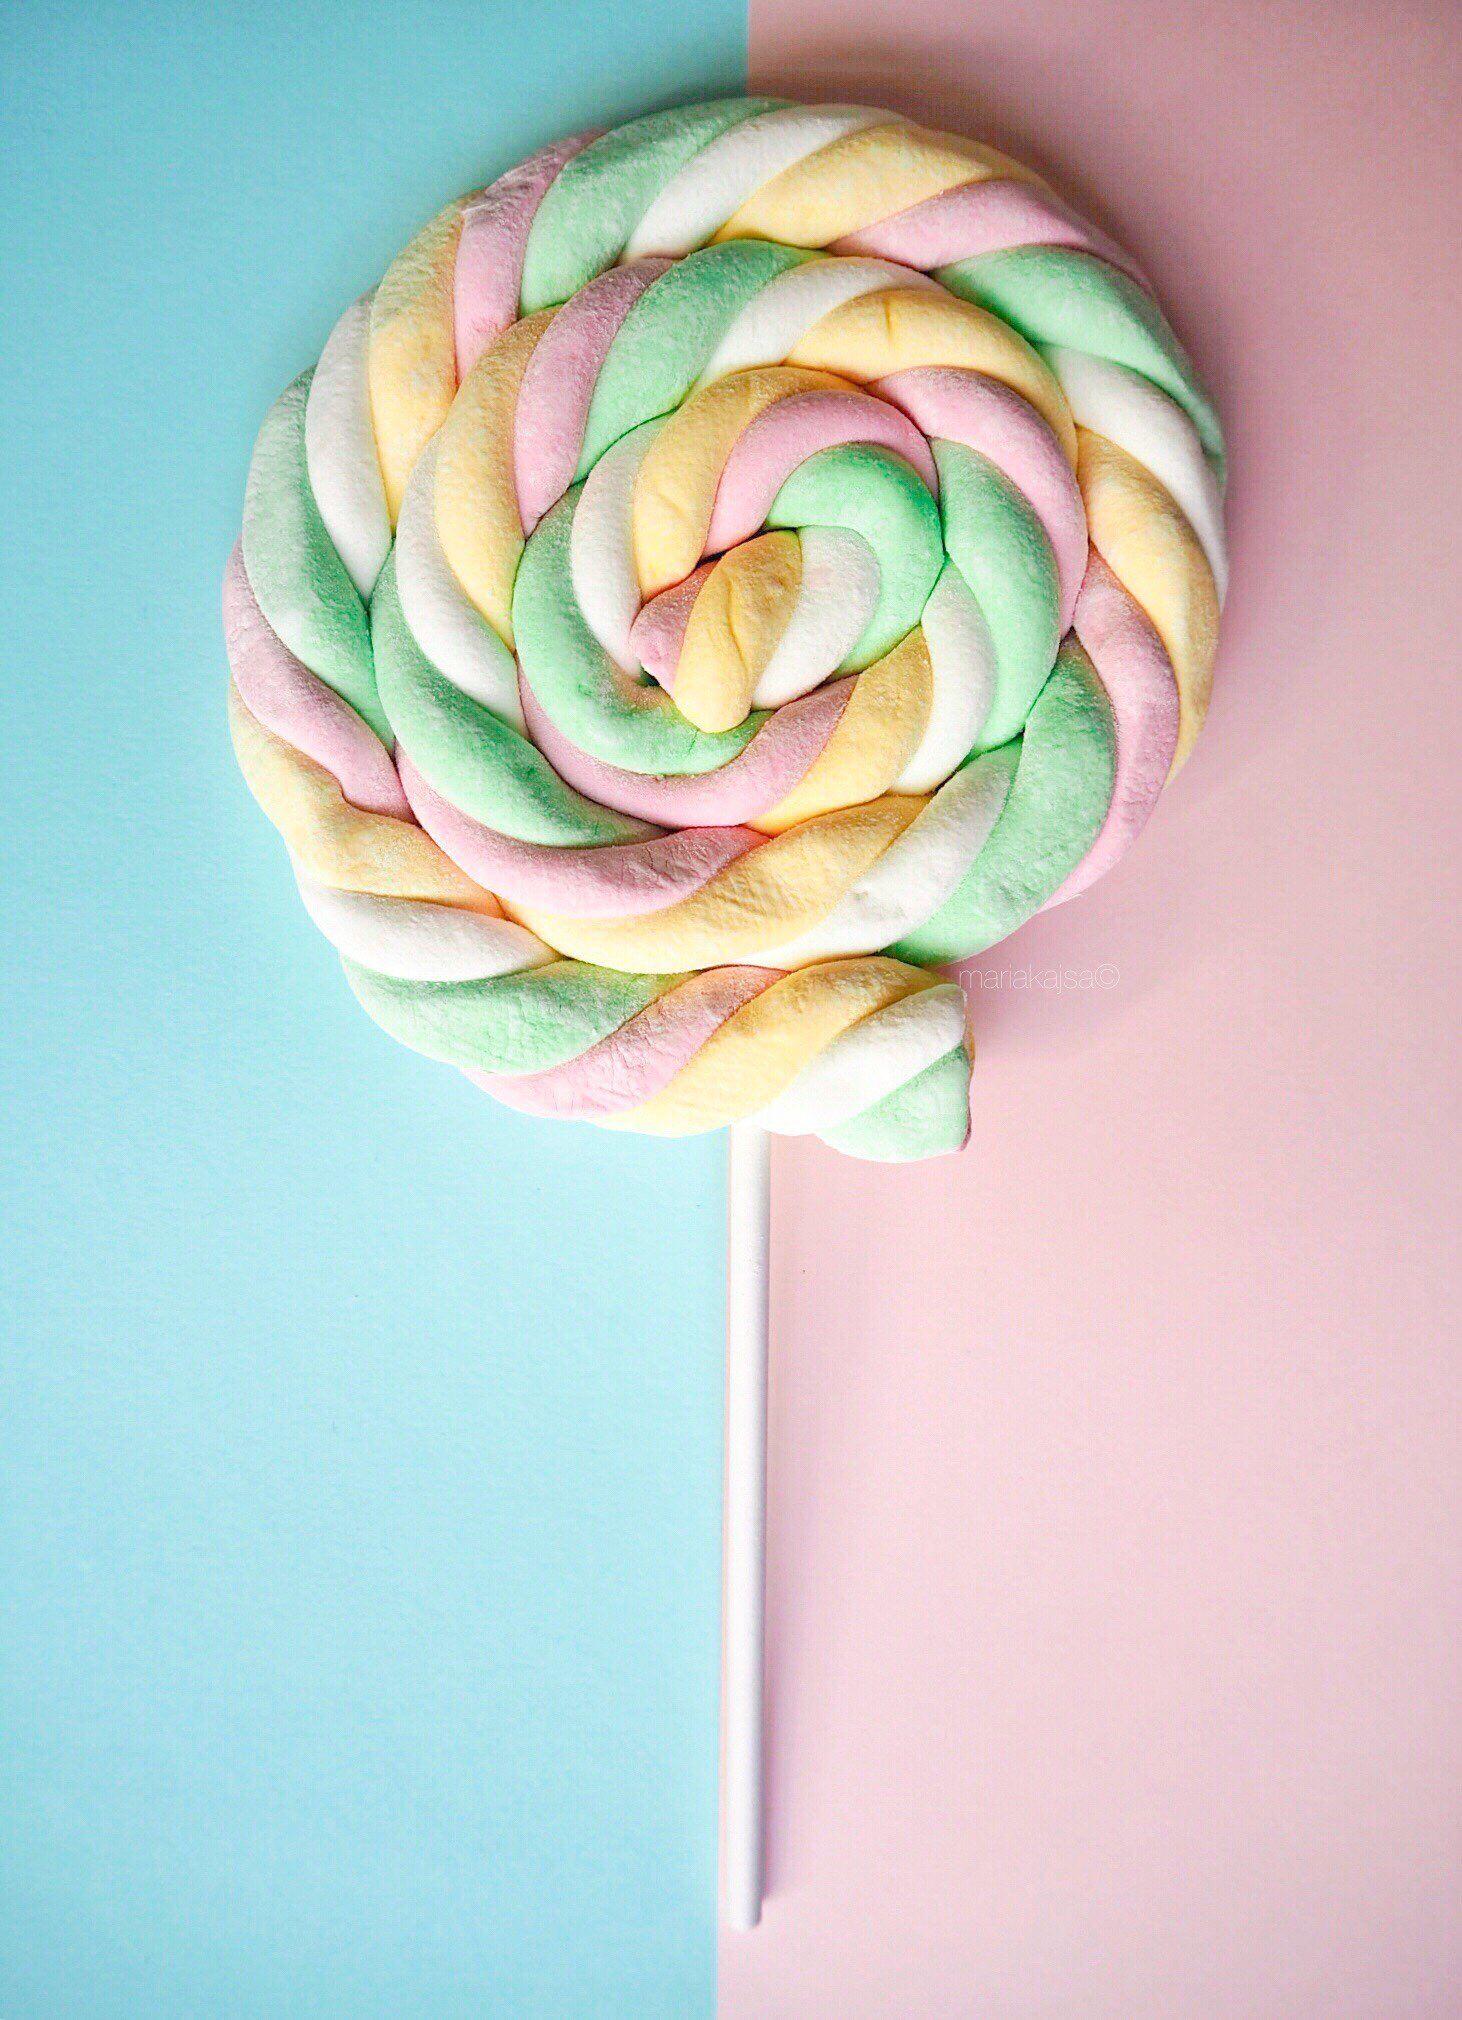 iPhone and Android Wallpaper: Pastel Candy Lollipop Wallpaper